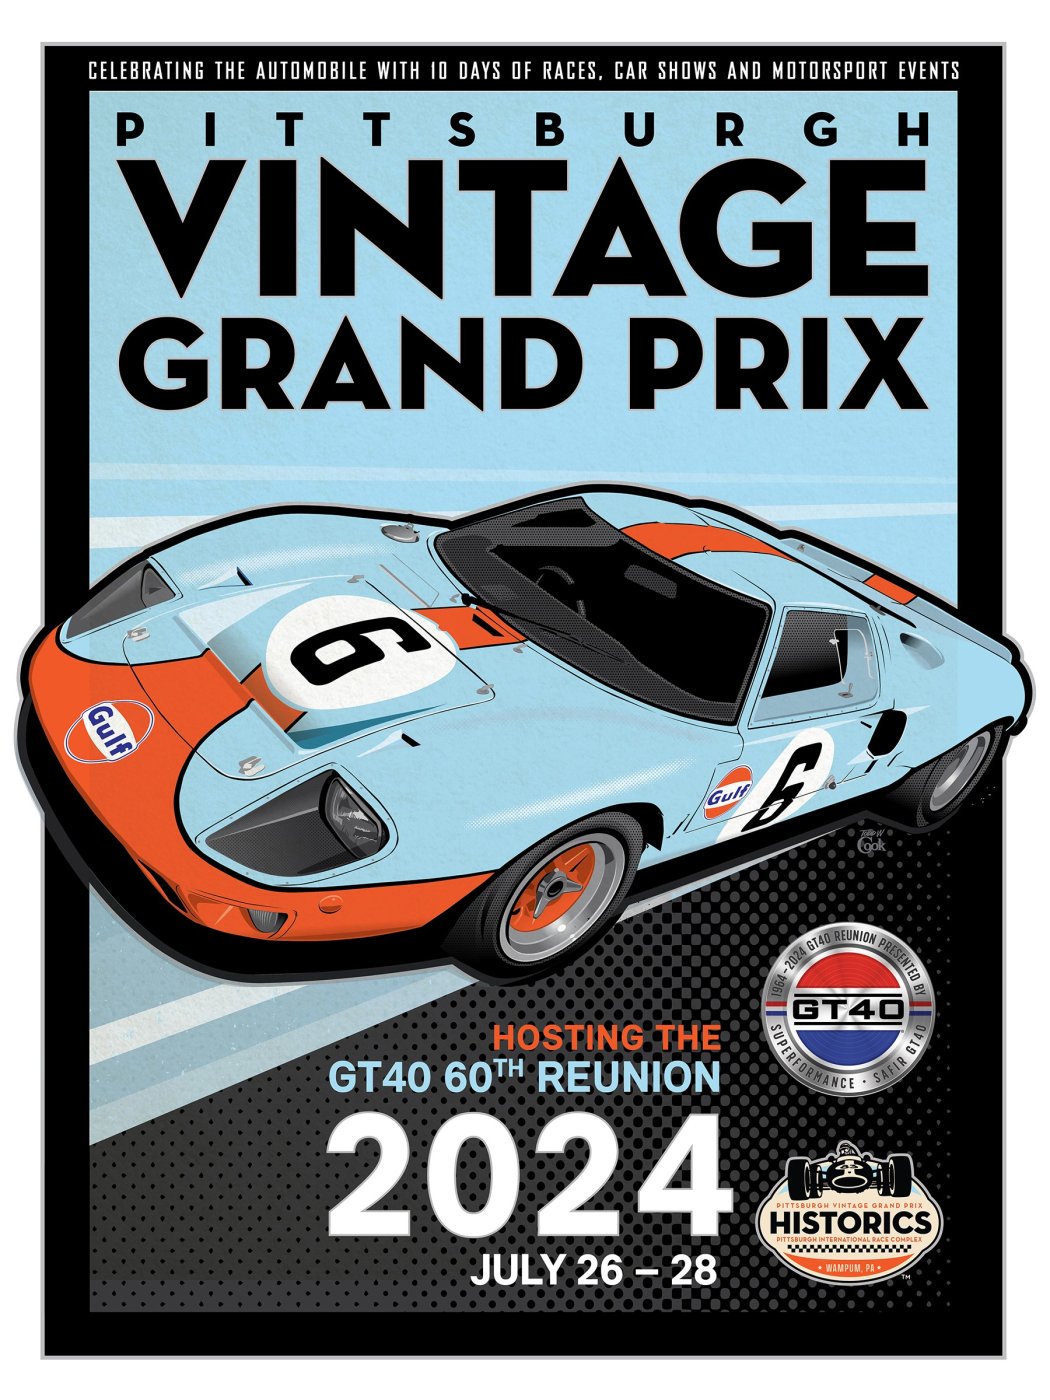 2024 GT Reunion poster released. | GT40s